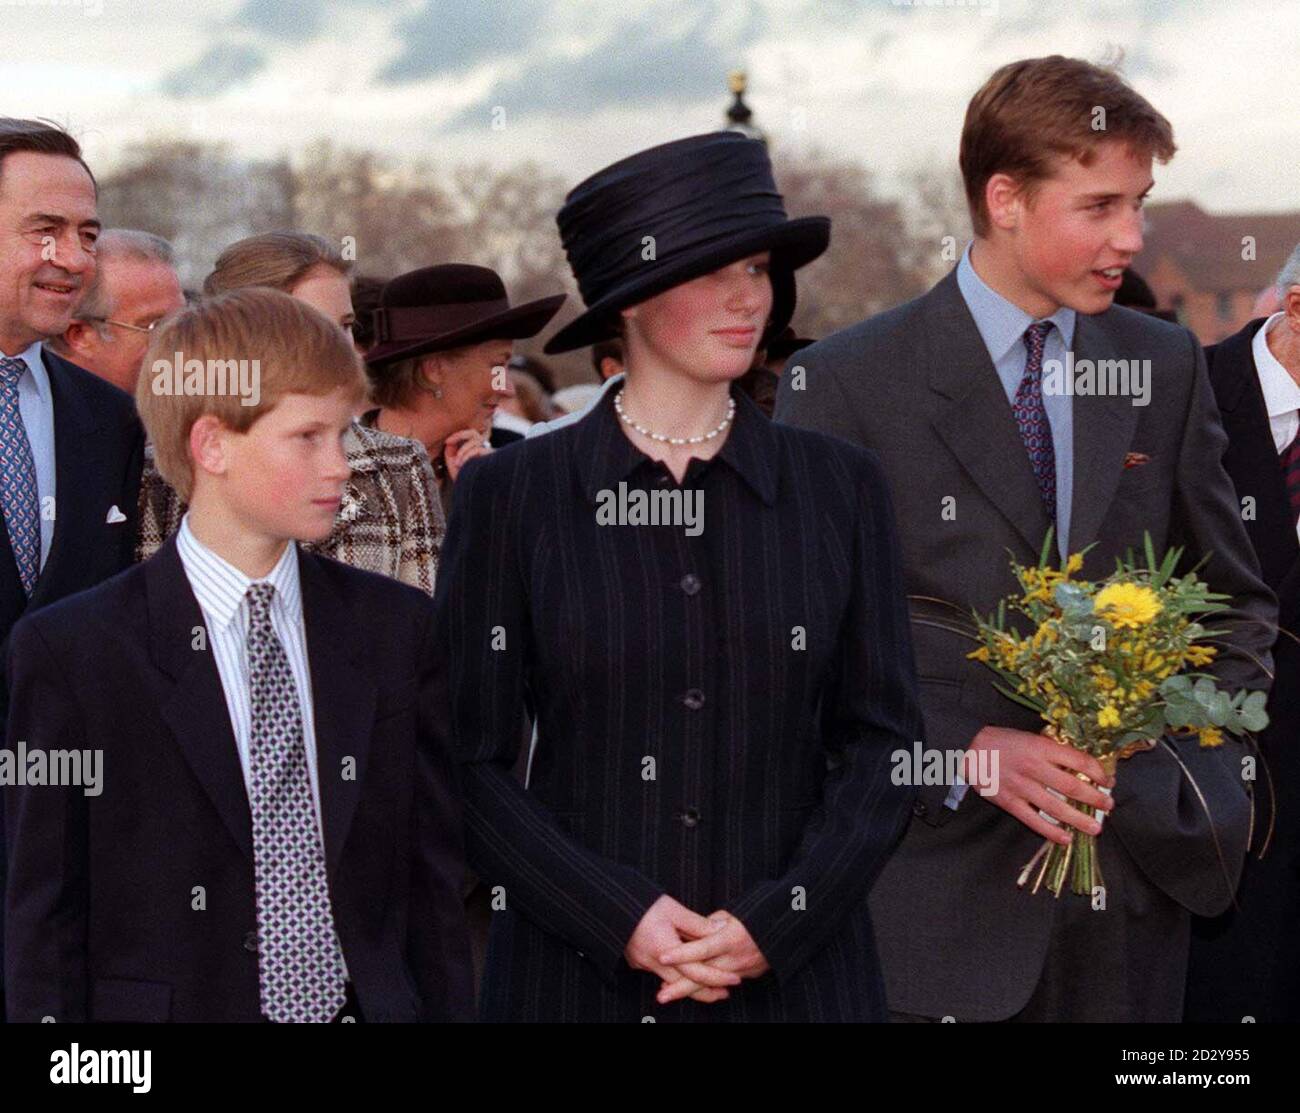 Prince William (right) and Prince Harry with Zara Phillips, daughter of the  Princess Royal at the Royal Naval College in Greenwich today (Thursday),  where the Prince of Wales held a lunch for